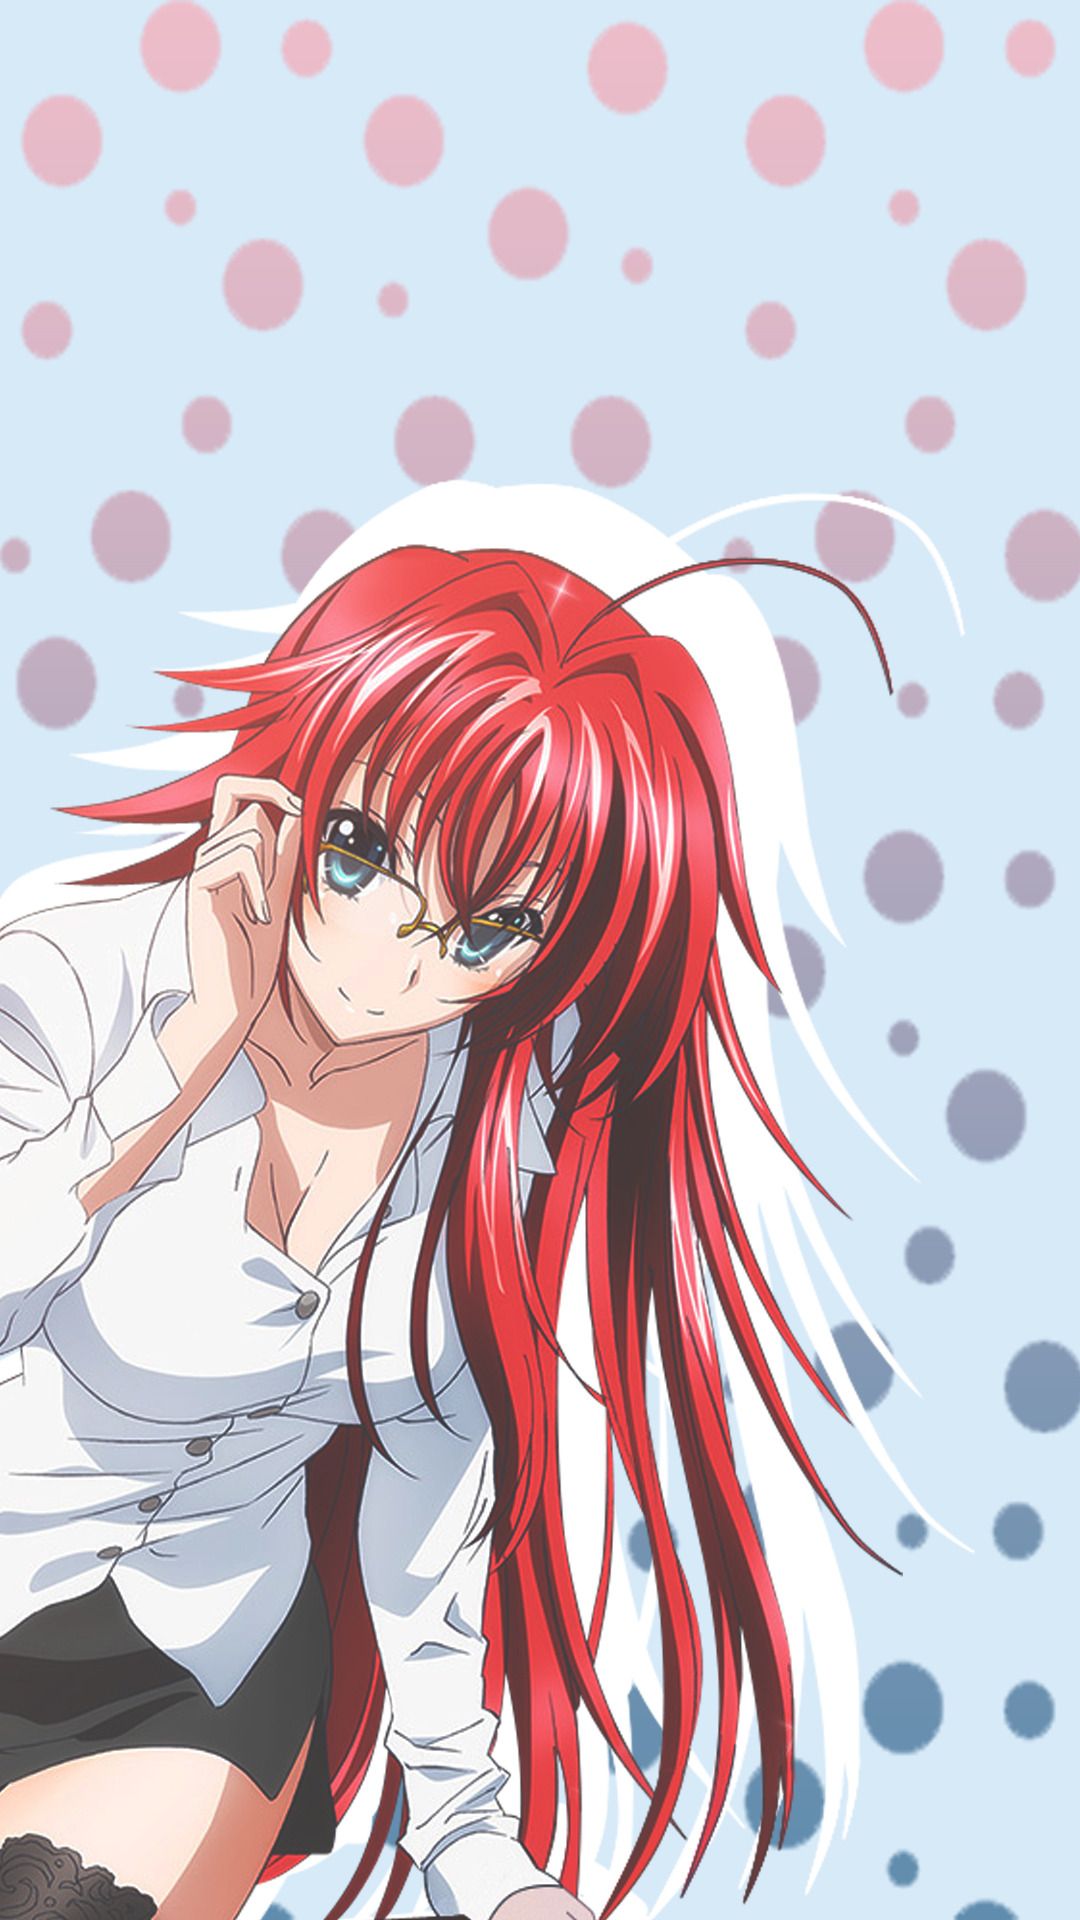 Rias gremory dxd highschool anime background 1080 wallpapers desktop issei ...